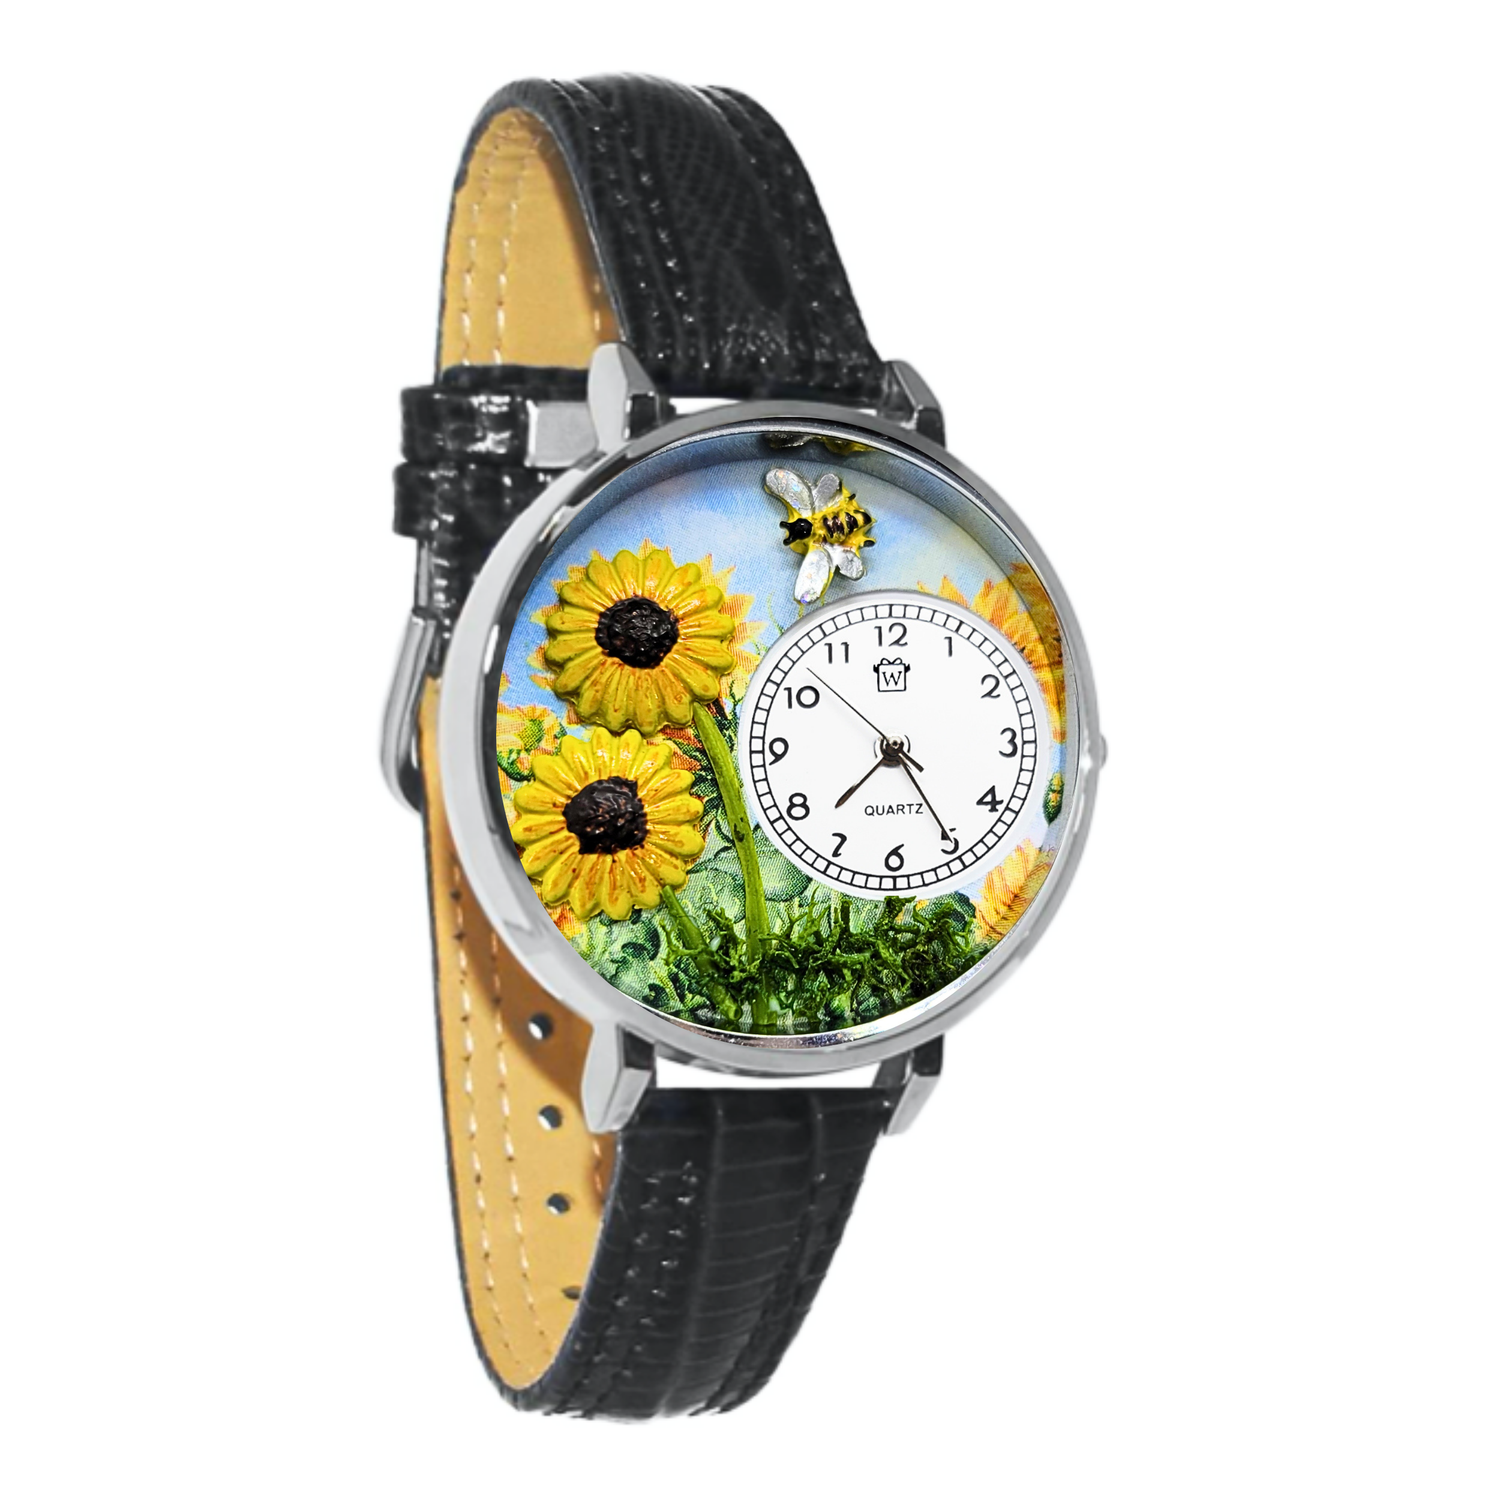 Whimsical Gifts | Sunflower 3D Watch Large Style | Handmade in USA | Holiday & Seasonal Themed | Spring & Summer Fun | Novelty Unique Fun Miniatures Gift | Silver Finish Black Leather Watch Band